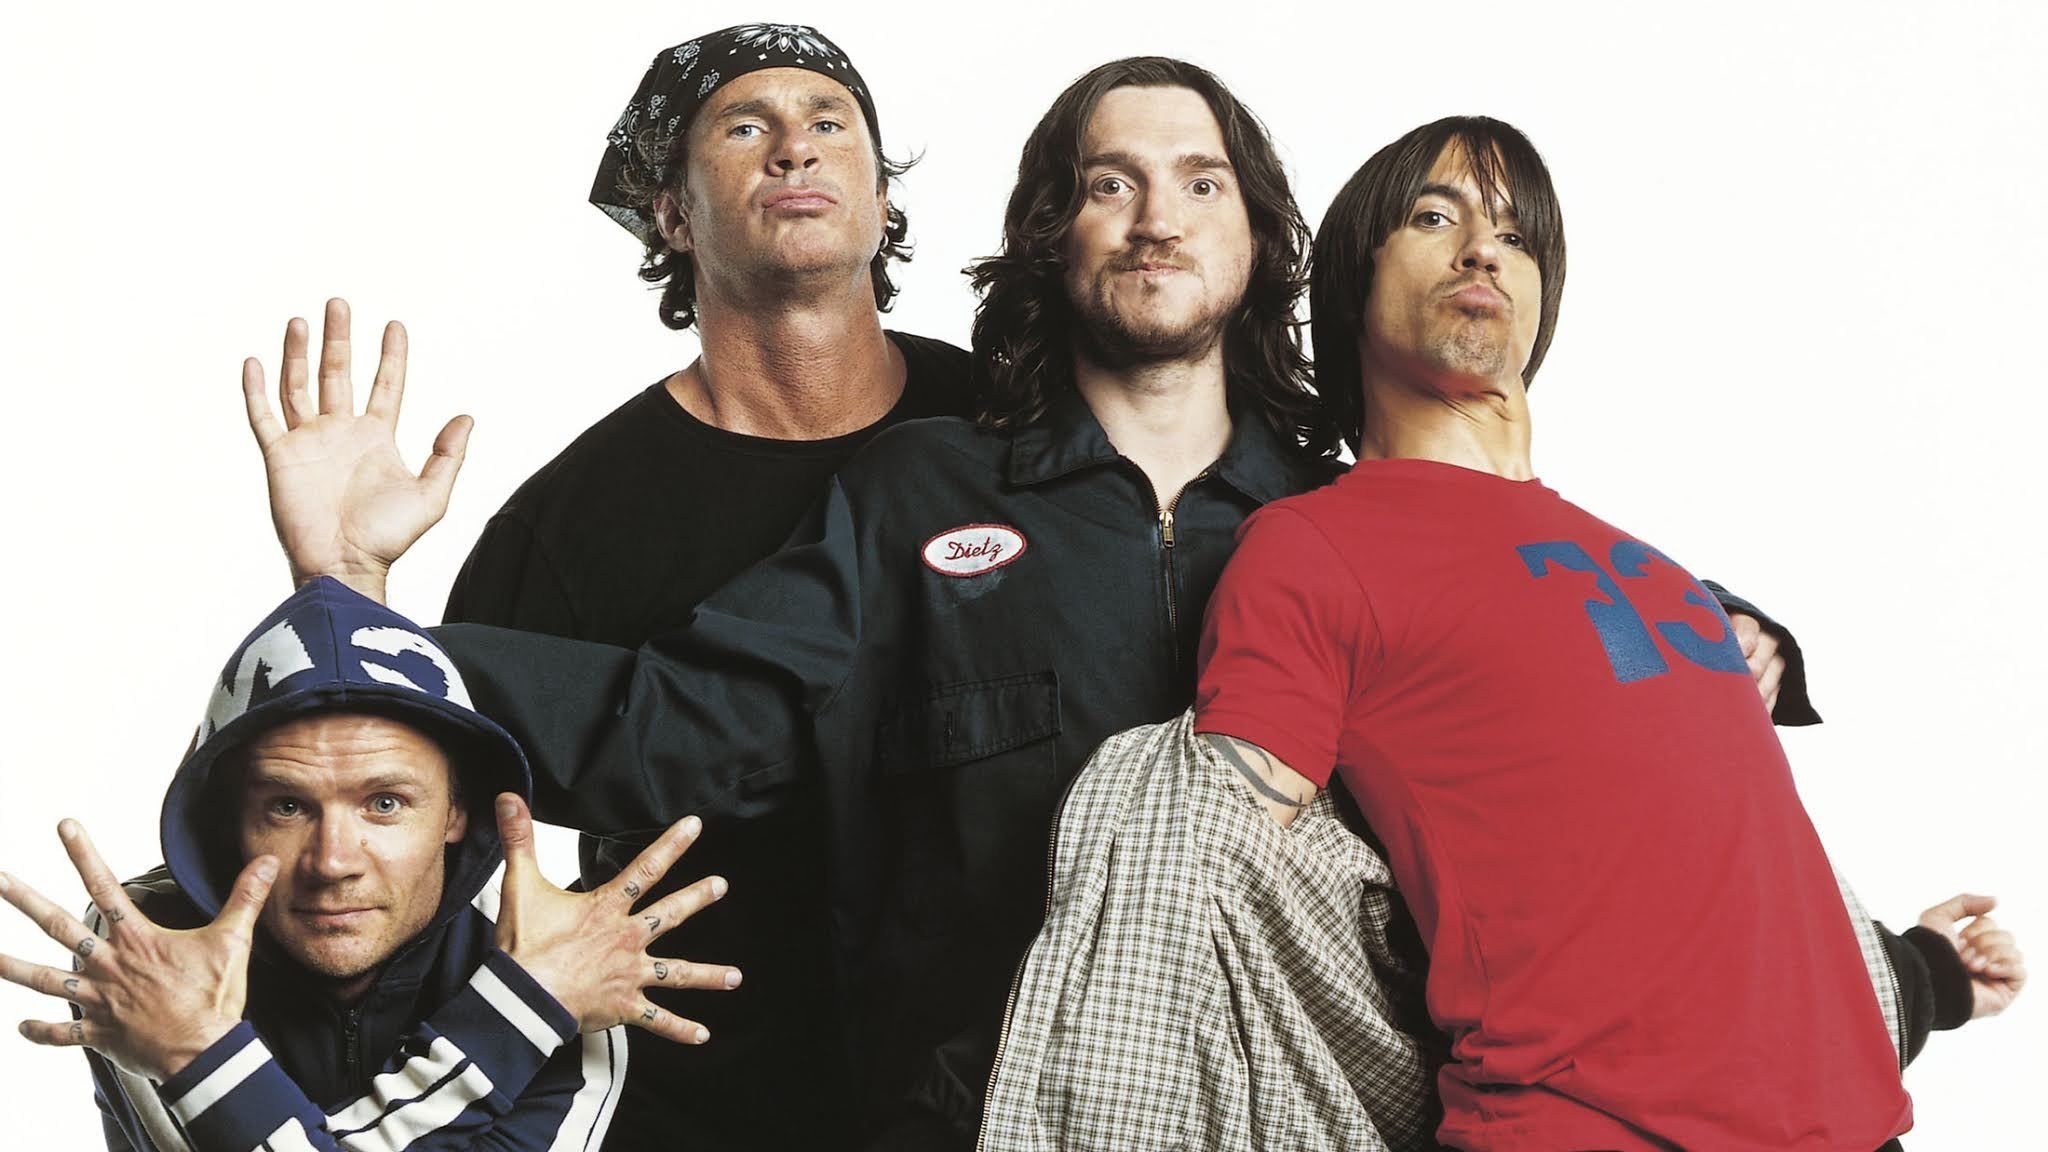 Red Hot Chili Peppers: The rock stars, Creating an intoxicating new musical style by combining funk and punk rock together. 2050x1160 HD Background.